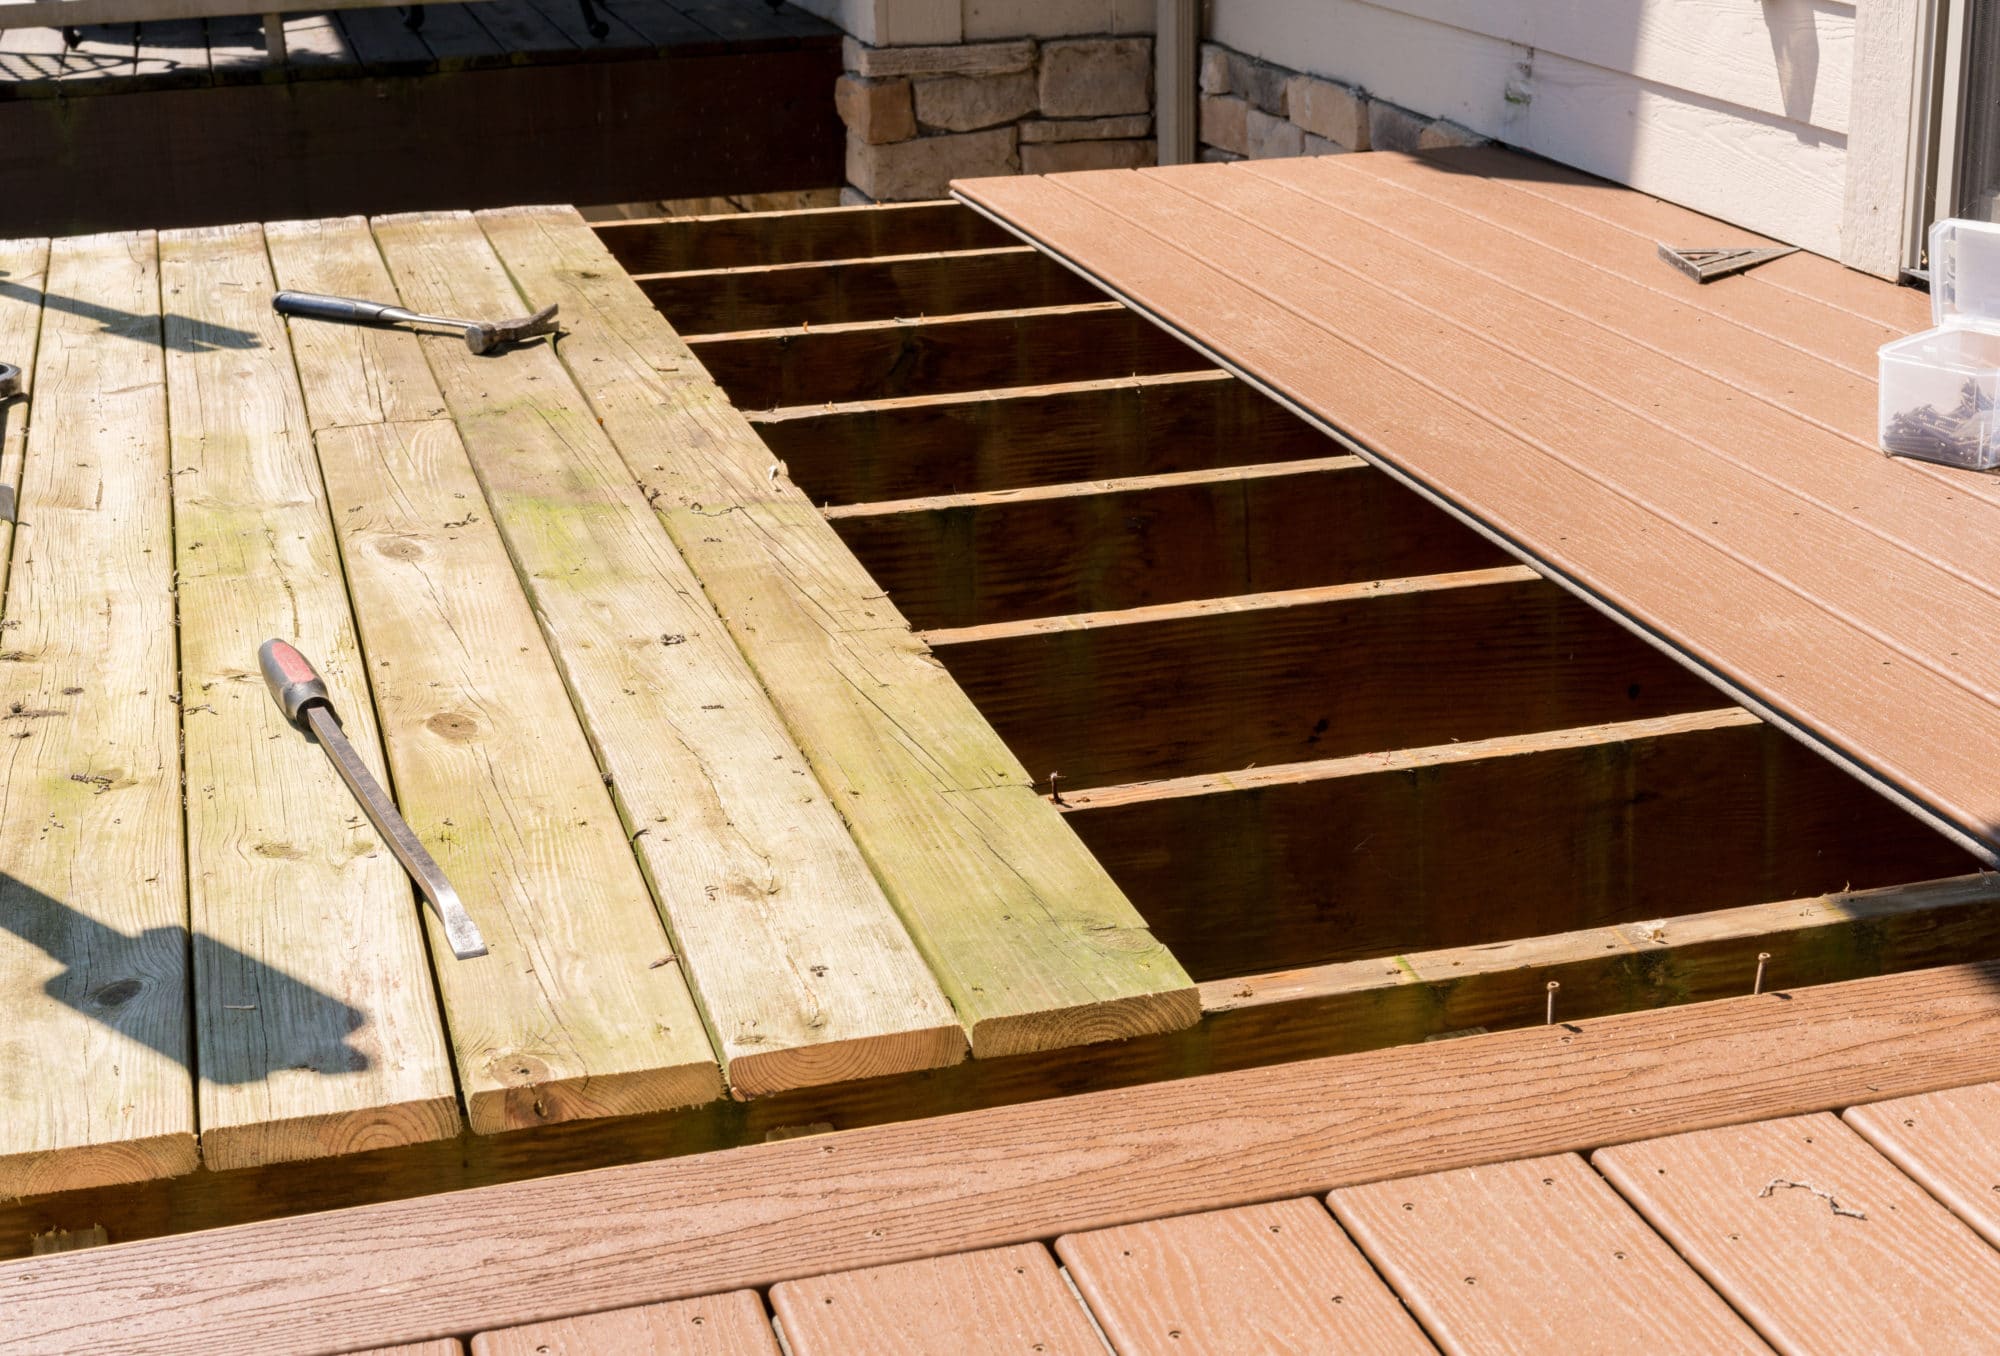 We repair and replace old wooden decking with modern synthetic composite materials.